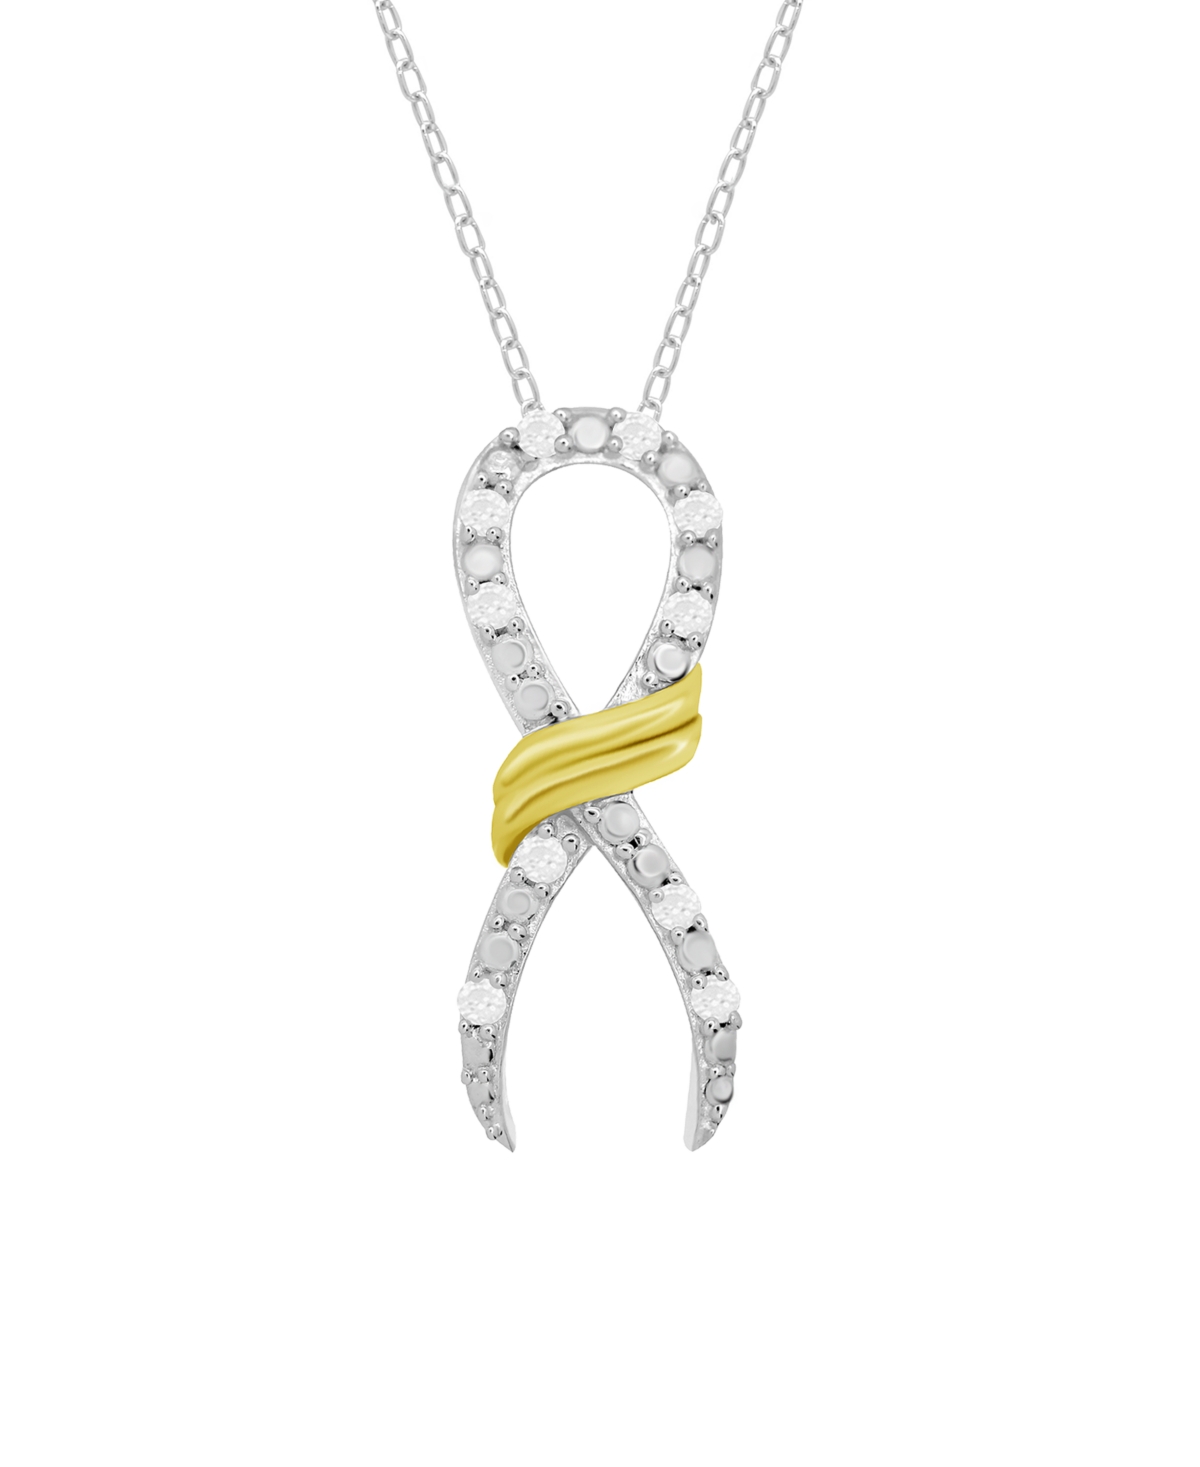 Diamond Awareness Ribbon Pendant Necklace (1/10 ct. t.w.) In Sterling Silver & 14K Gold-Plate - Sterling Silver  k gold-plated sterling